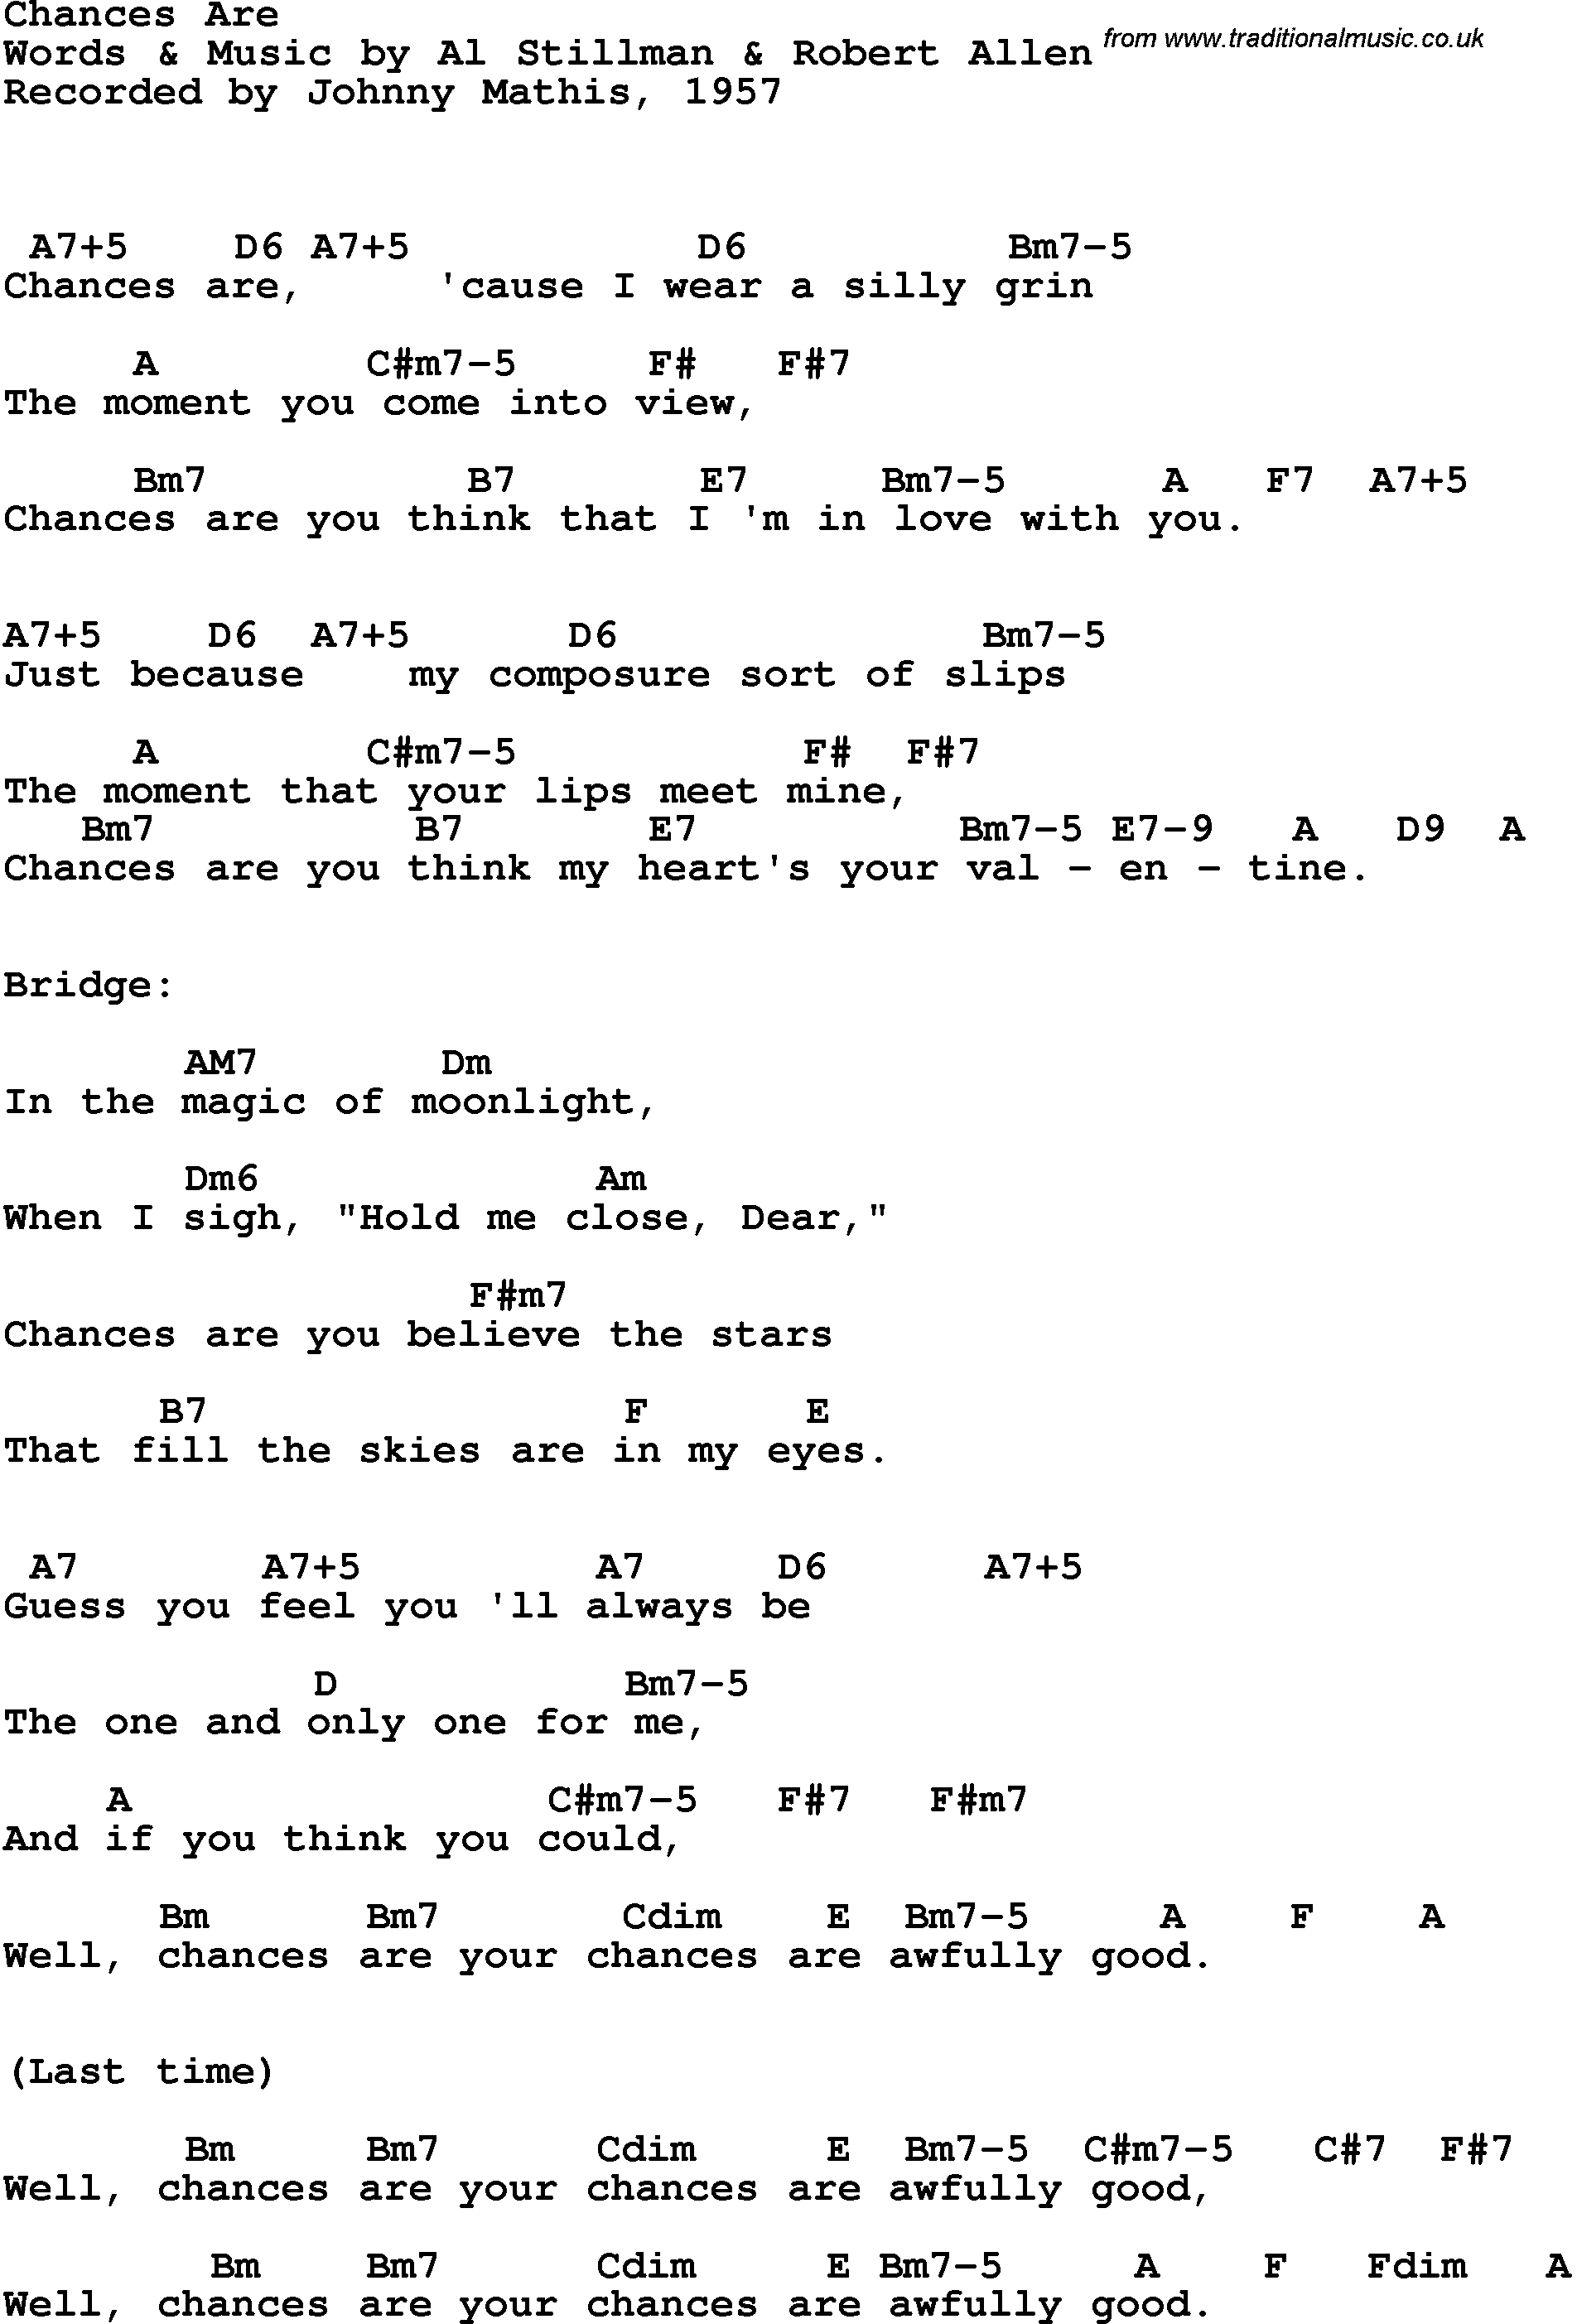 Song Lyrics with guitar chords for Chances Are - Johnny Mathis, 1957